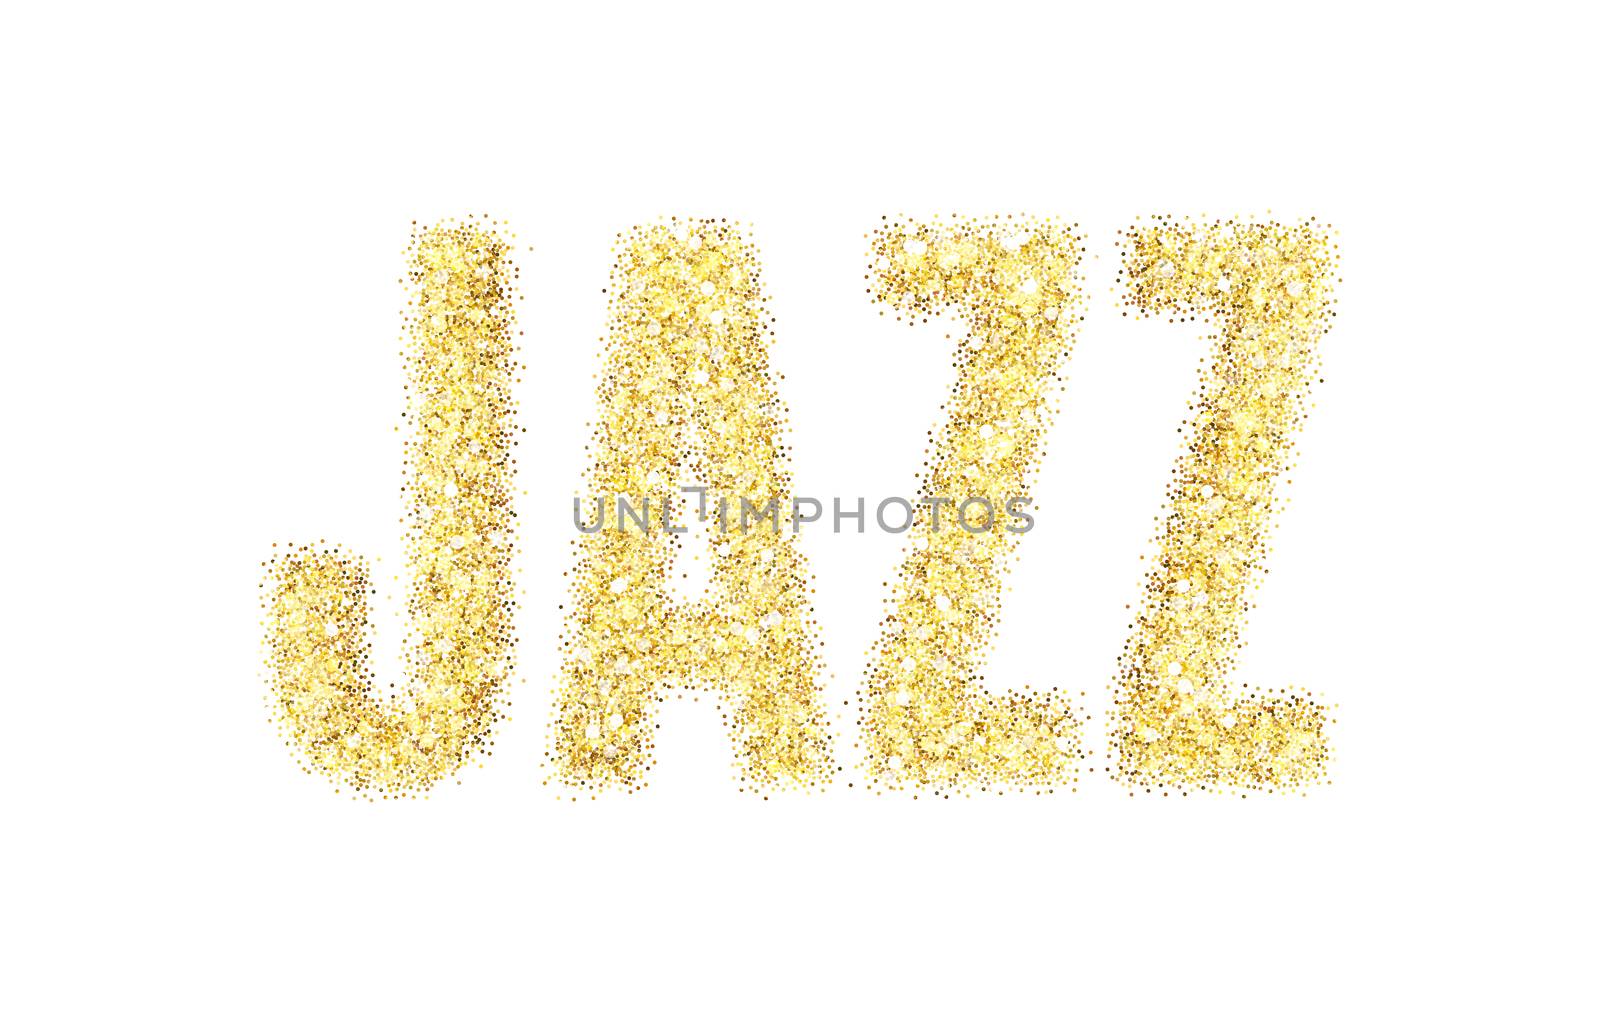 Gold glitter Inscription jazz. Golden sparcle word jazz on black transparent background. Amber particles gold confetti.